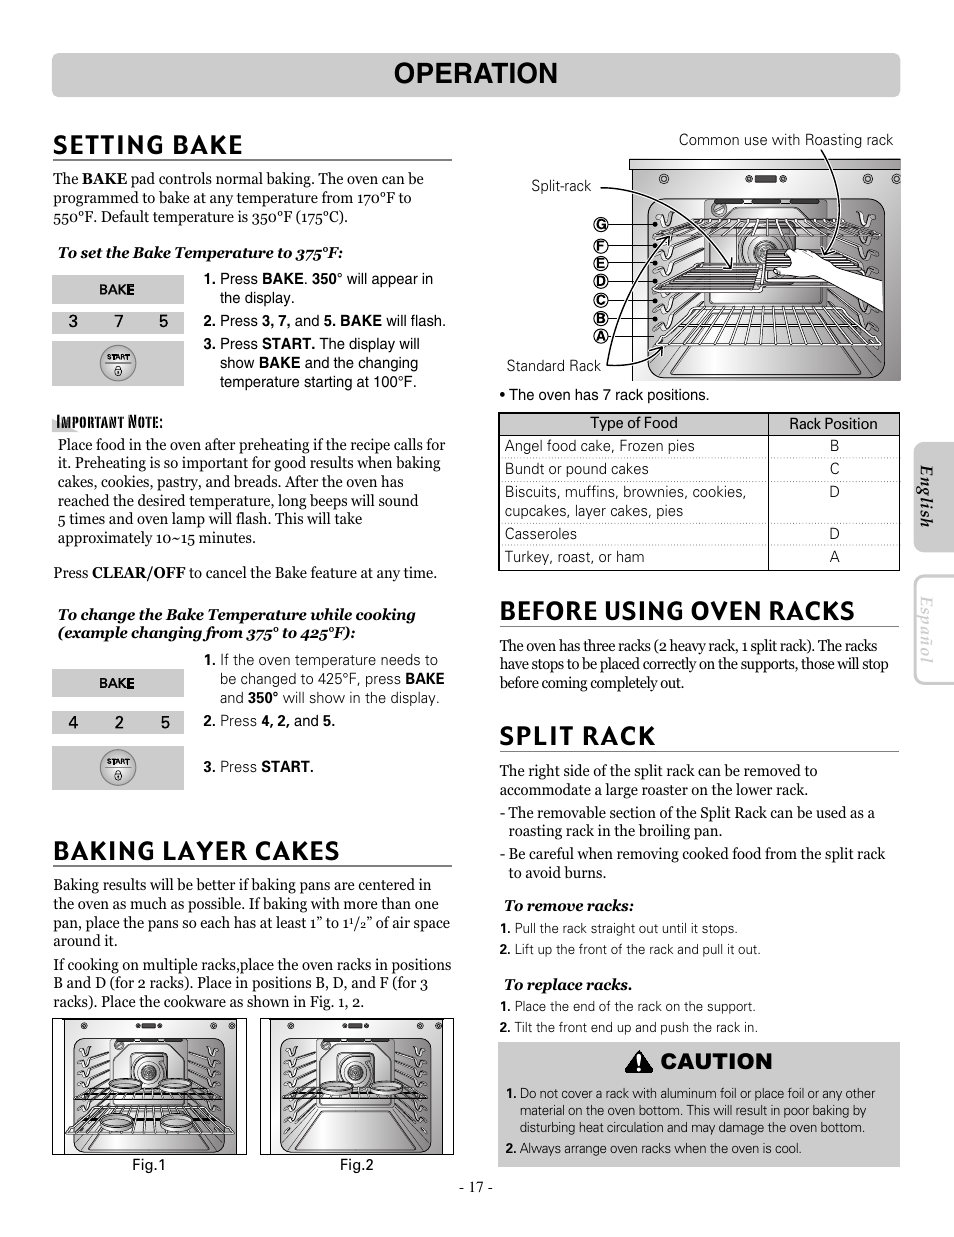 Operation, Set t in g b ake, Baking layer cakes | Before using oven racks, Caution | LG LRE30755SW User Manual | Page 17 / 36